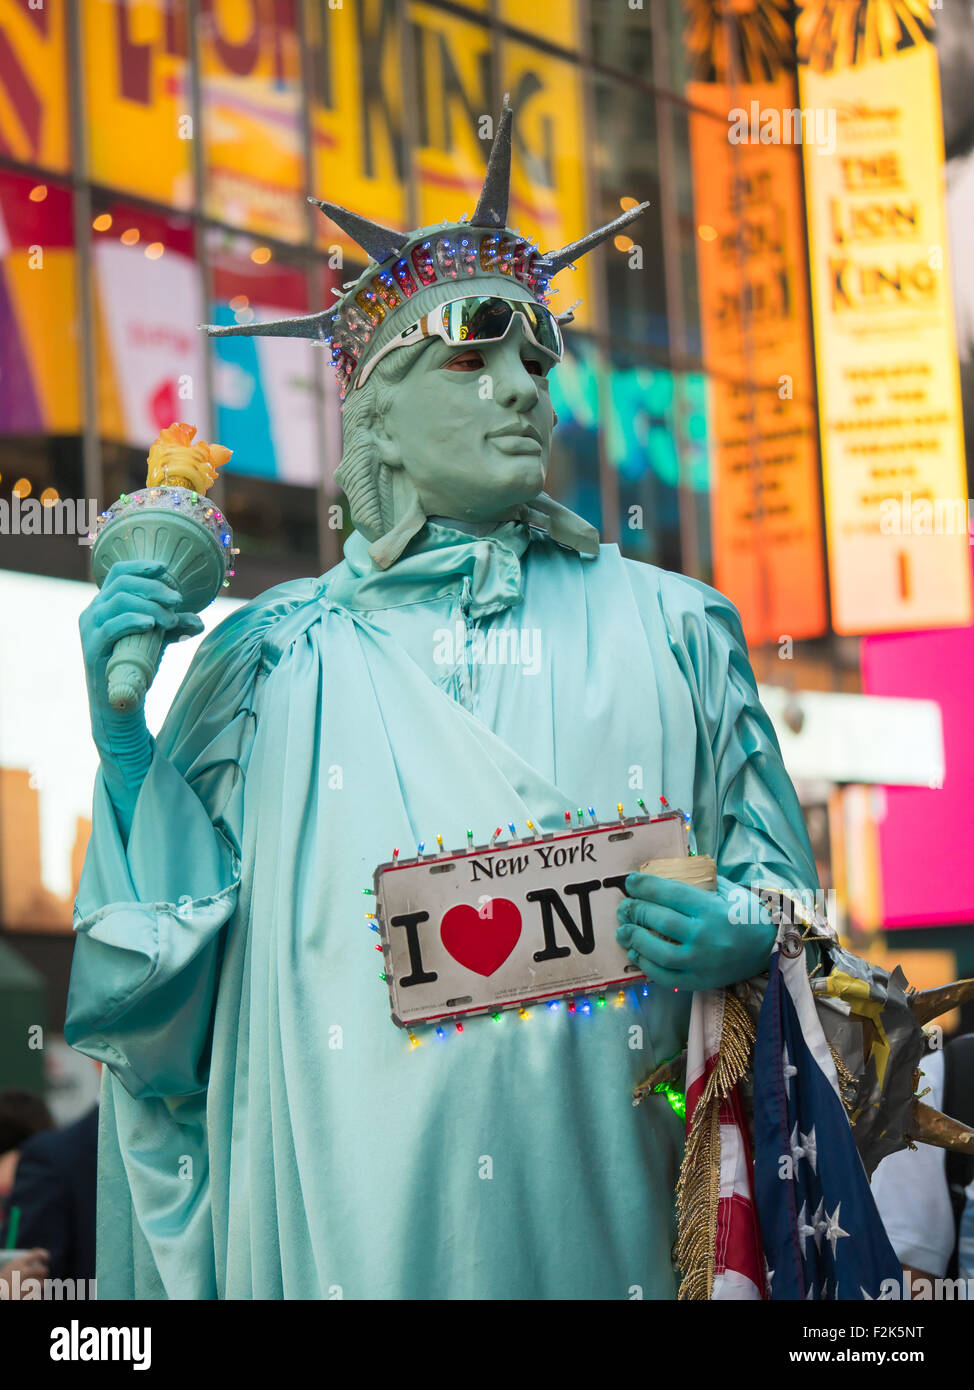 A performer in a Statue of Liberty costume, works seeking tips for photos with tourists in Times Square in New York City. Stock Photo